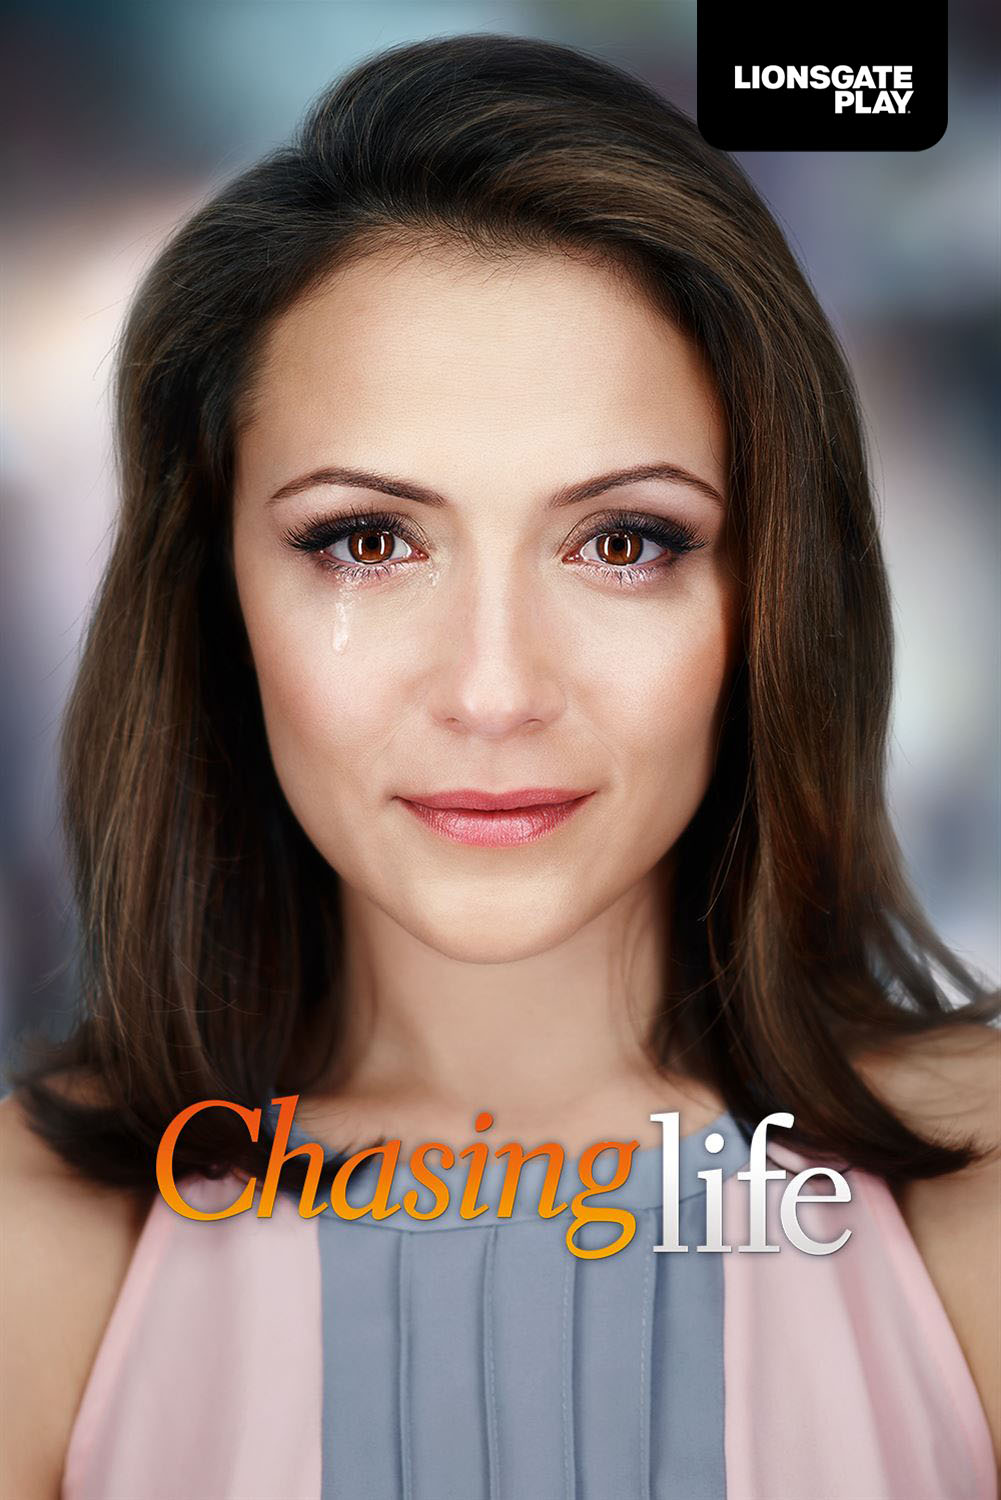 Chasing Life Lionsgate Play